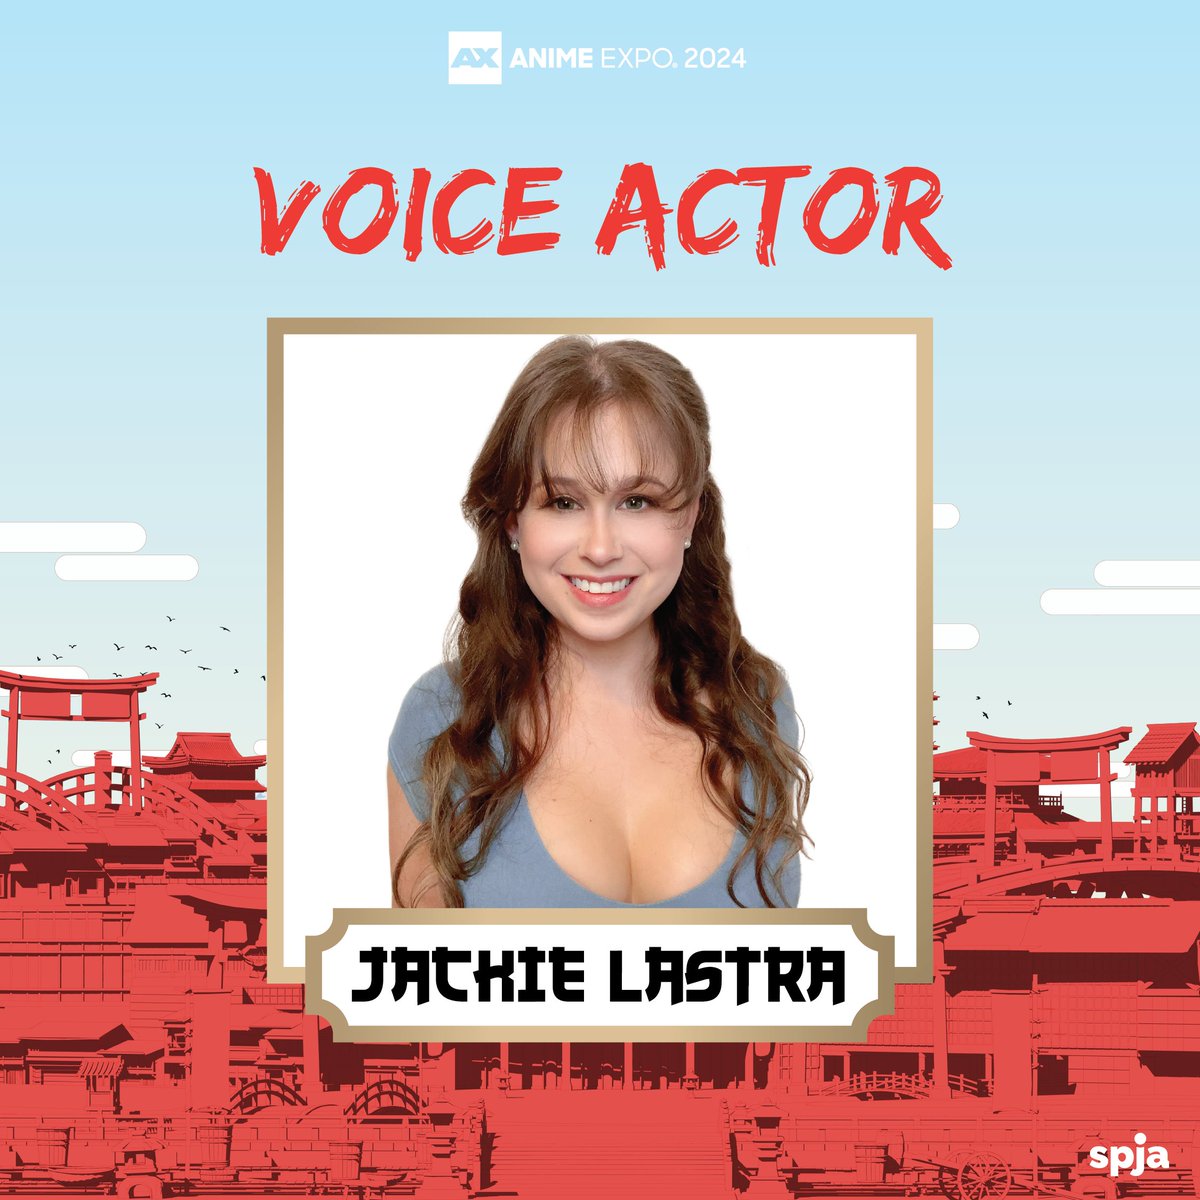 📣 Announcing Jackie Lastra to appear at #AX2024. Come meet Jackie Lastra, voice of Xiangling (Genshin Impact), Fuuko (Undead Unluck), Melty (Rising of the Shield Hero), Kiyo (Demon Slayer), Serena (Pokemon Masters), and many more! 🎤 @JackieLastra